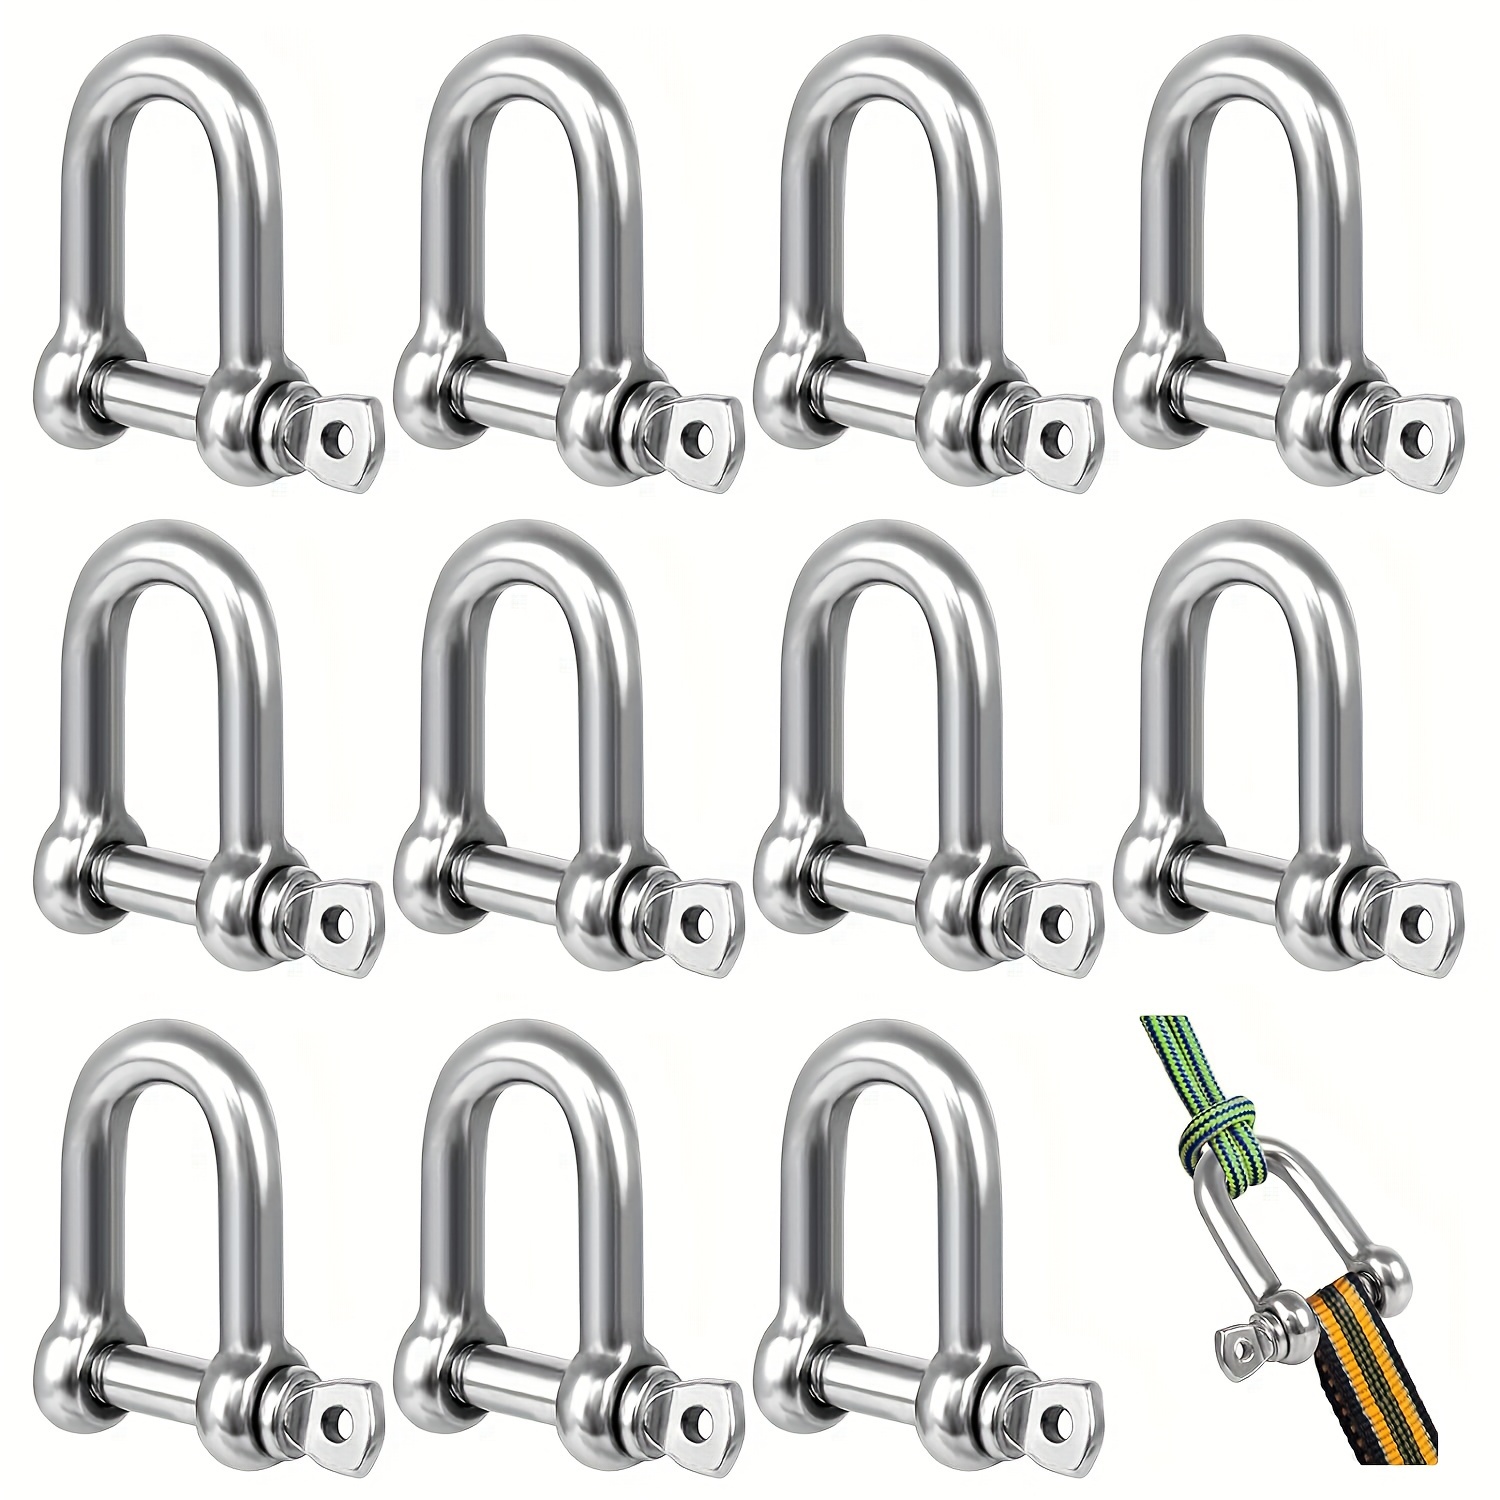 316 Stainless Steel Swivel Shackle Quick Release Boat Anchor